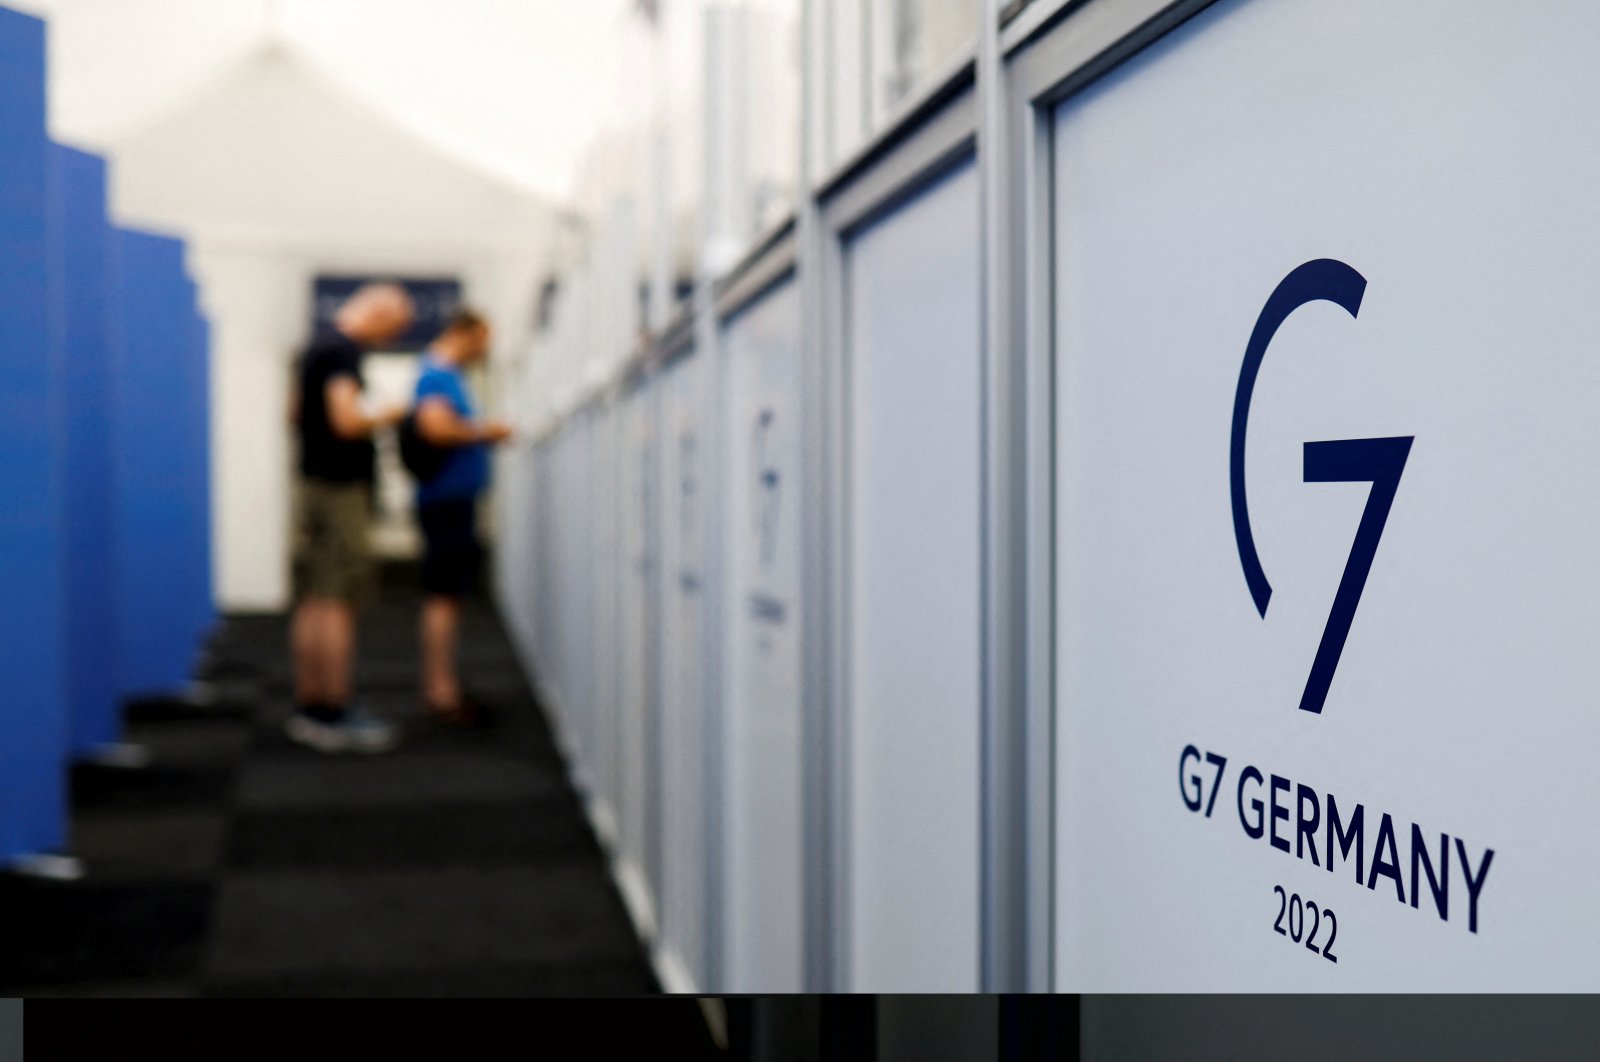 People pick up their accreditation for the G7 Summit, Garmisch-Partenkirchen, Germany, June 23, 2022. (Reuters Photo)